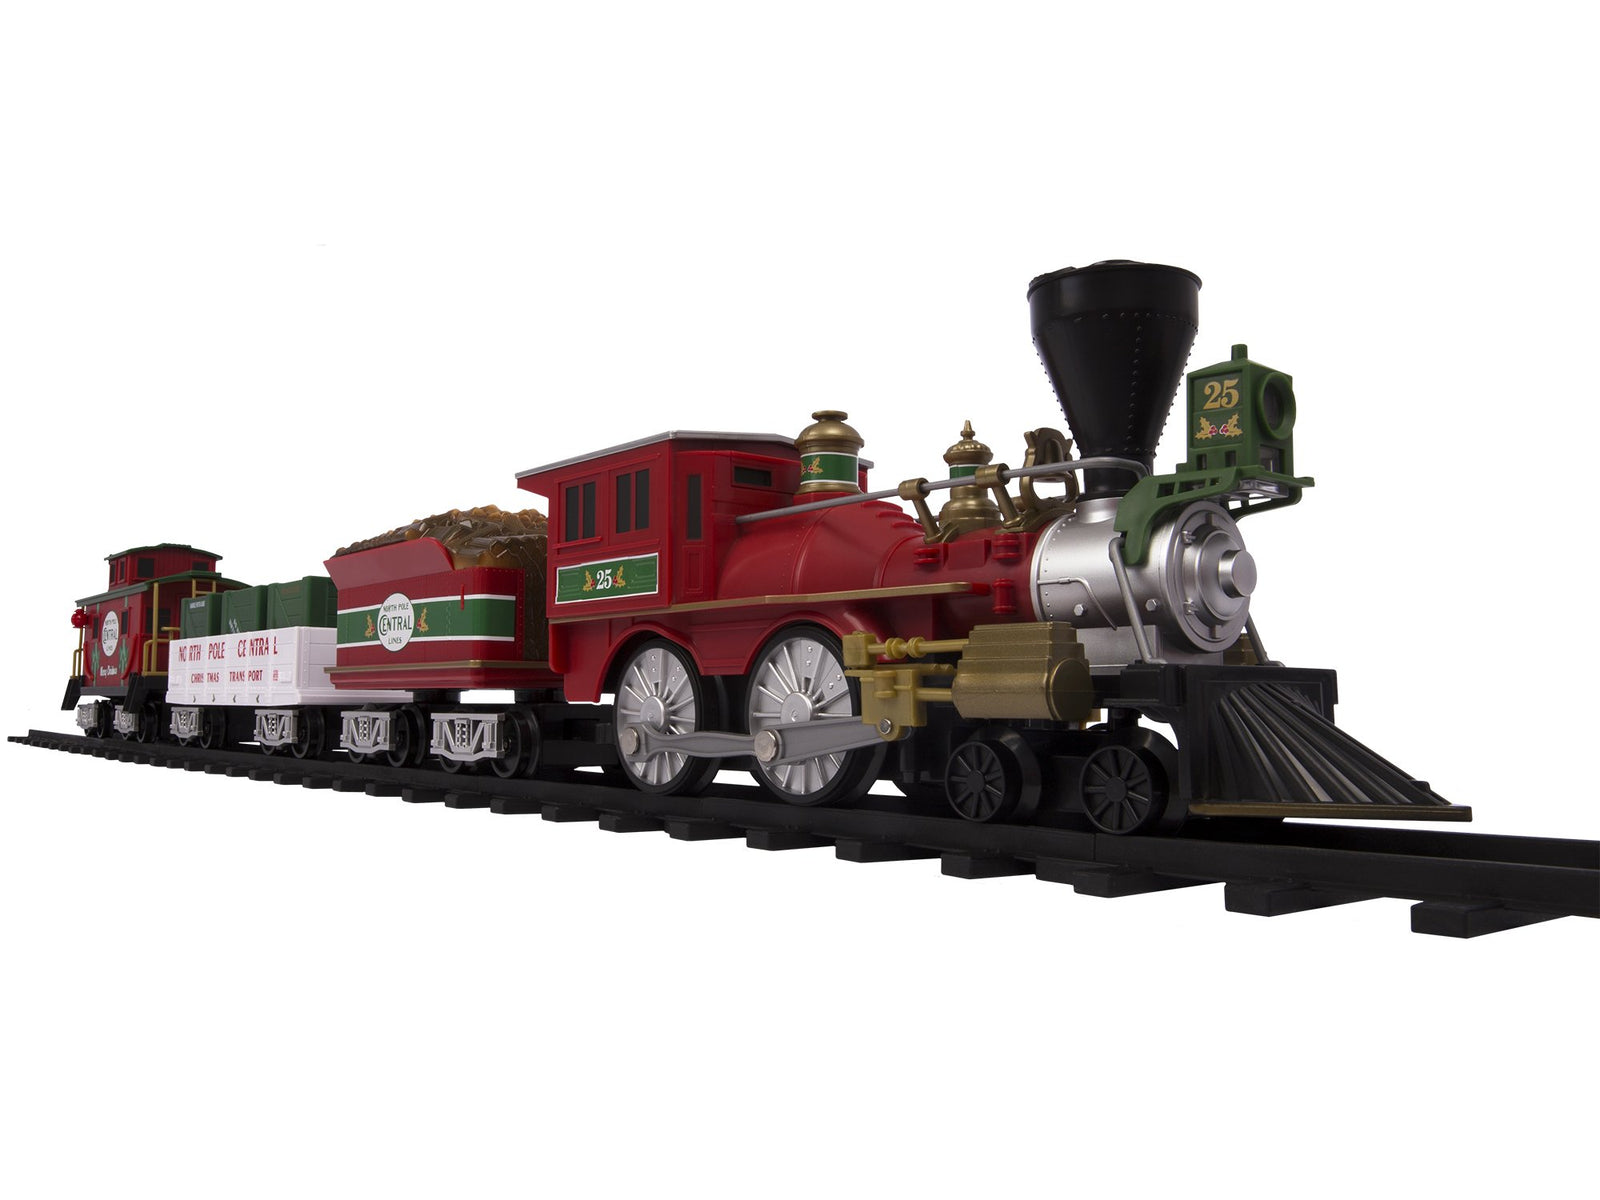 Lionel North Pole Central Ready-to-Play Freight Set, Battery-powered Model Train Set with Remote Multi, 50 x 73"